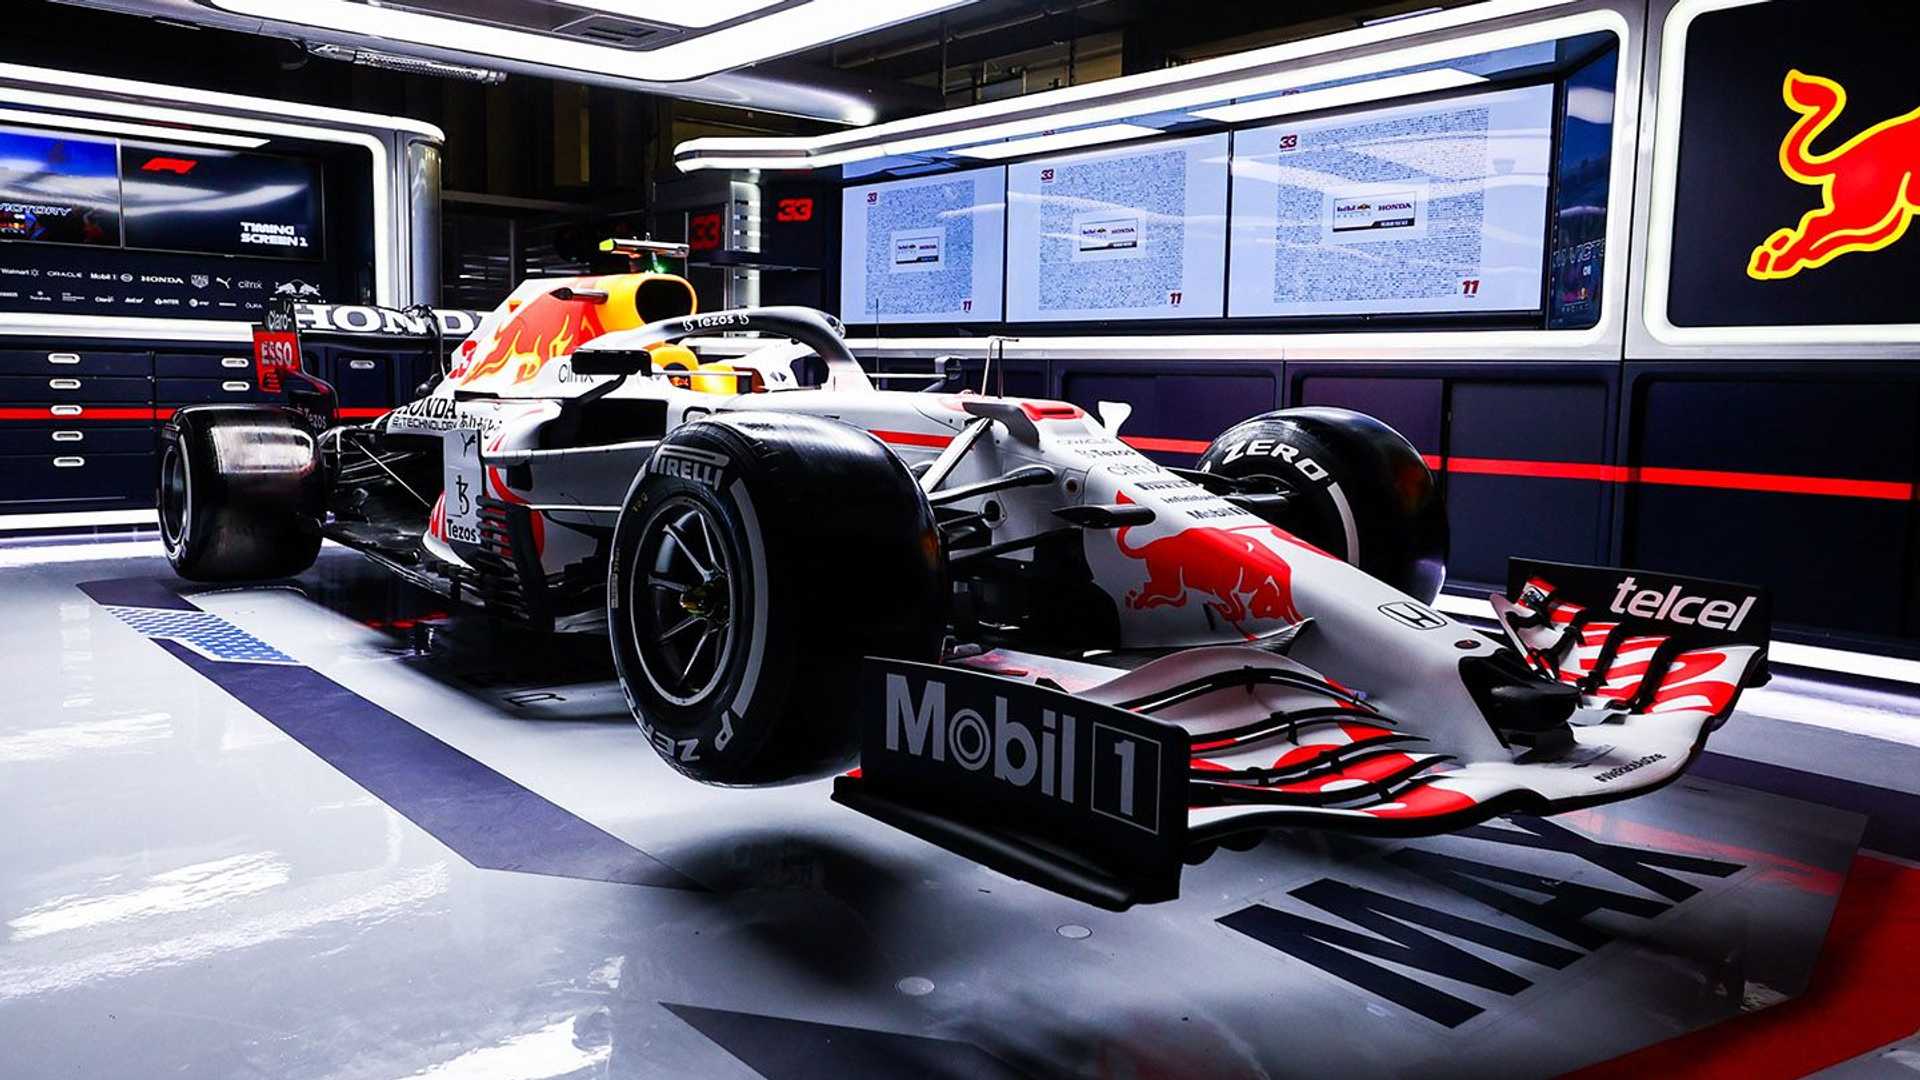 F1 Red Bull Reveals White Honda Thank You Livery For Turkish Gp